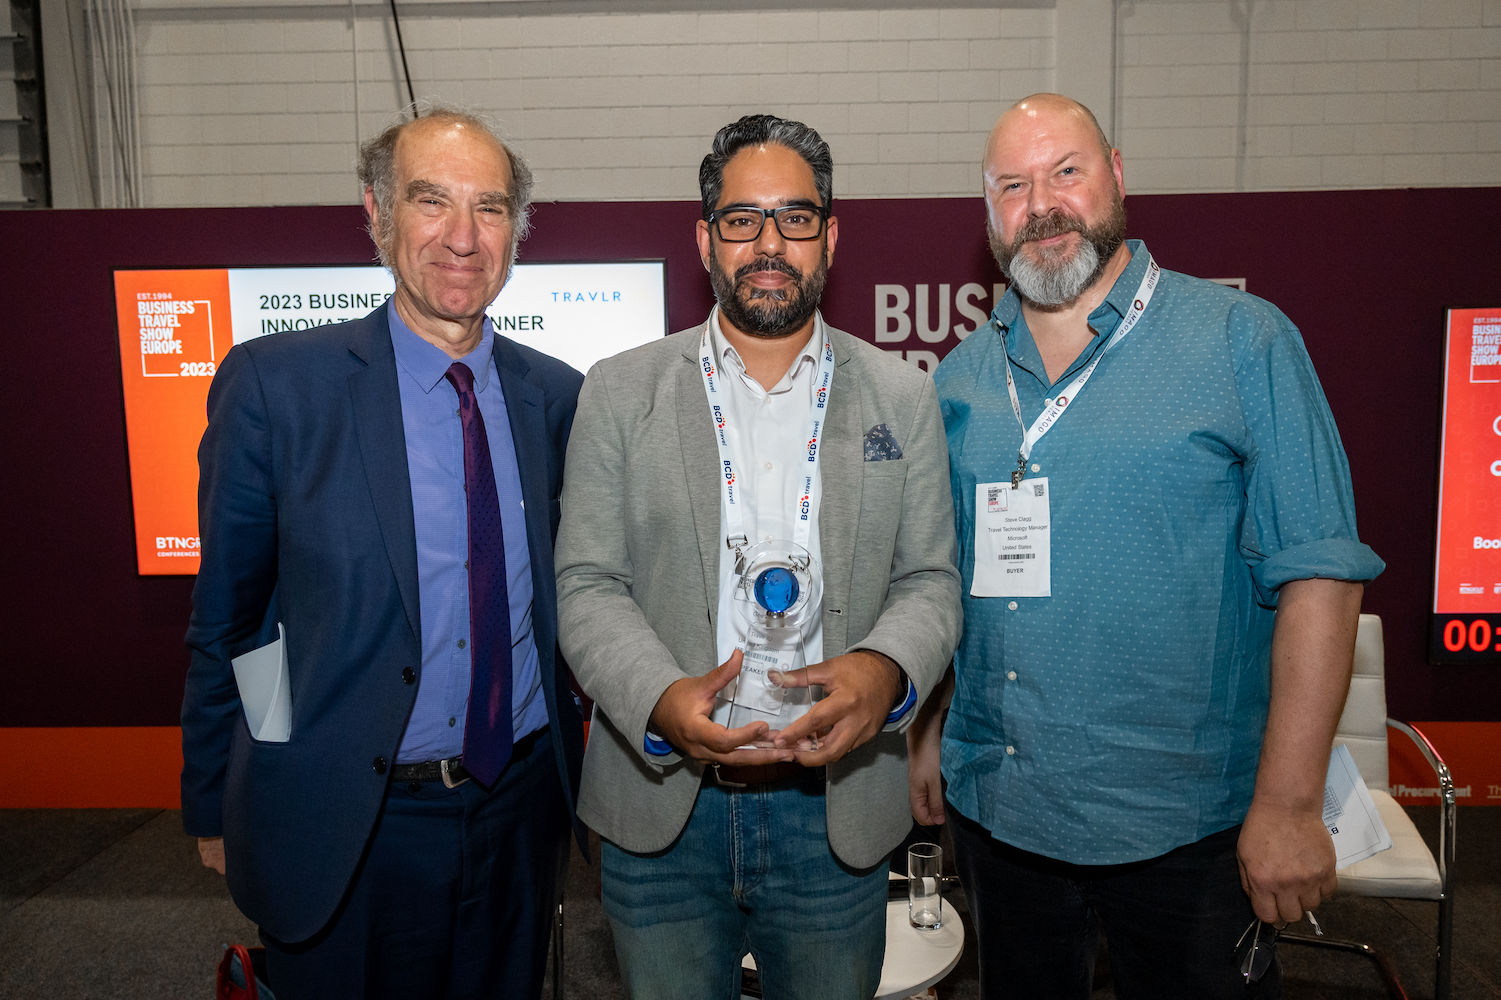 Travlr ID founder and creator Gee Mann (center), winner of the Business Travel Show's Innovation Faceoff, poses with the BTN Group's David Meyer (left) and Microsoft's Steve Clagg.Credit: Andy Hoskins